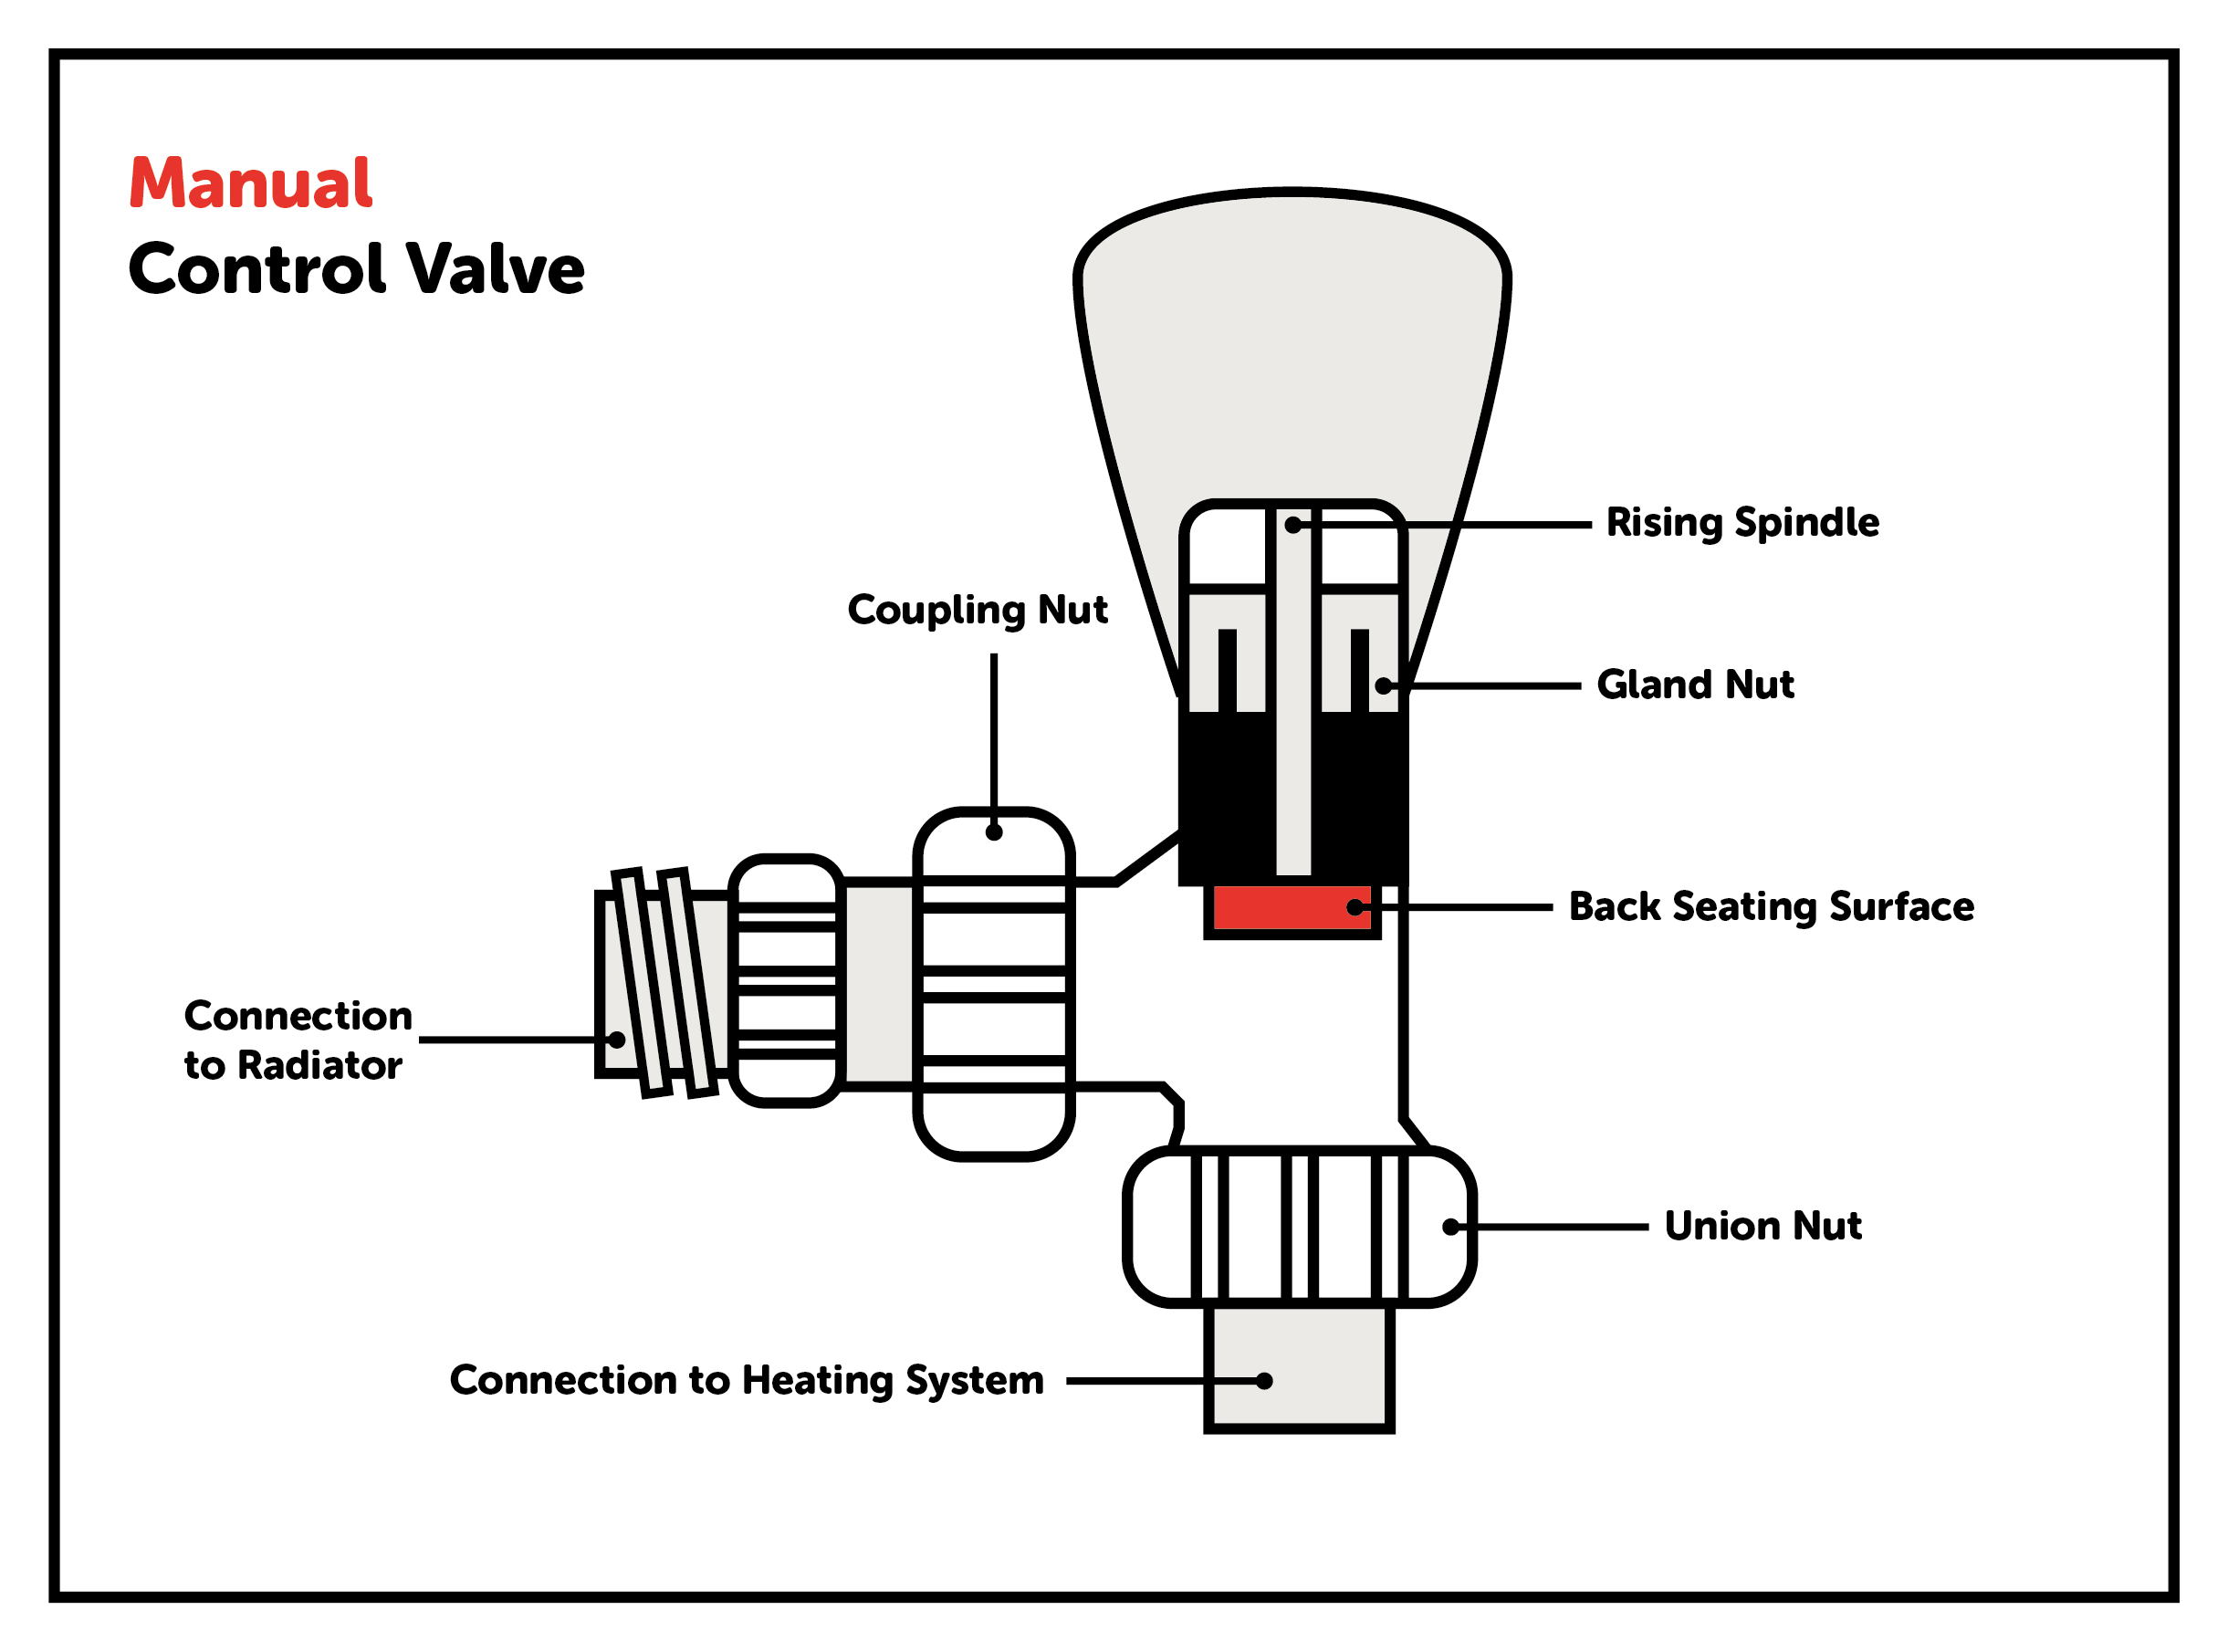 manual control valve with labelled parts - how to fix a leaking radiator